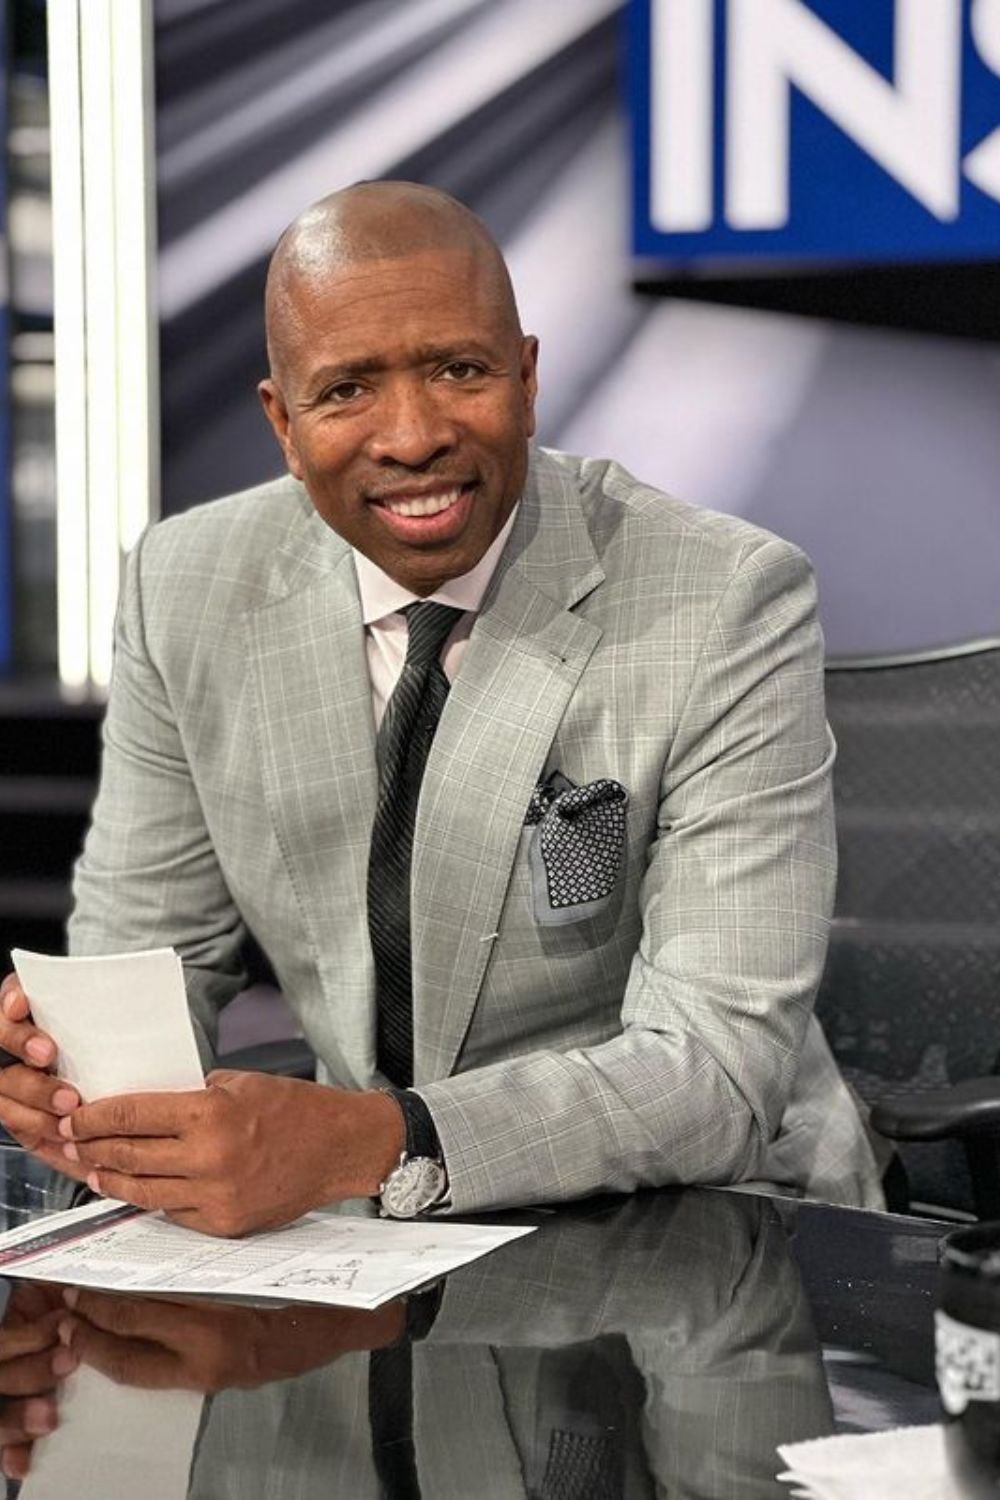 The Former NBA Player Kenny Smith 